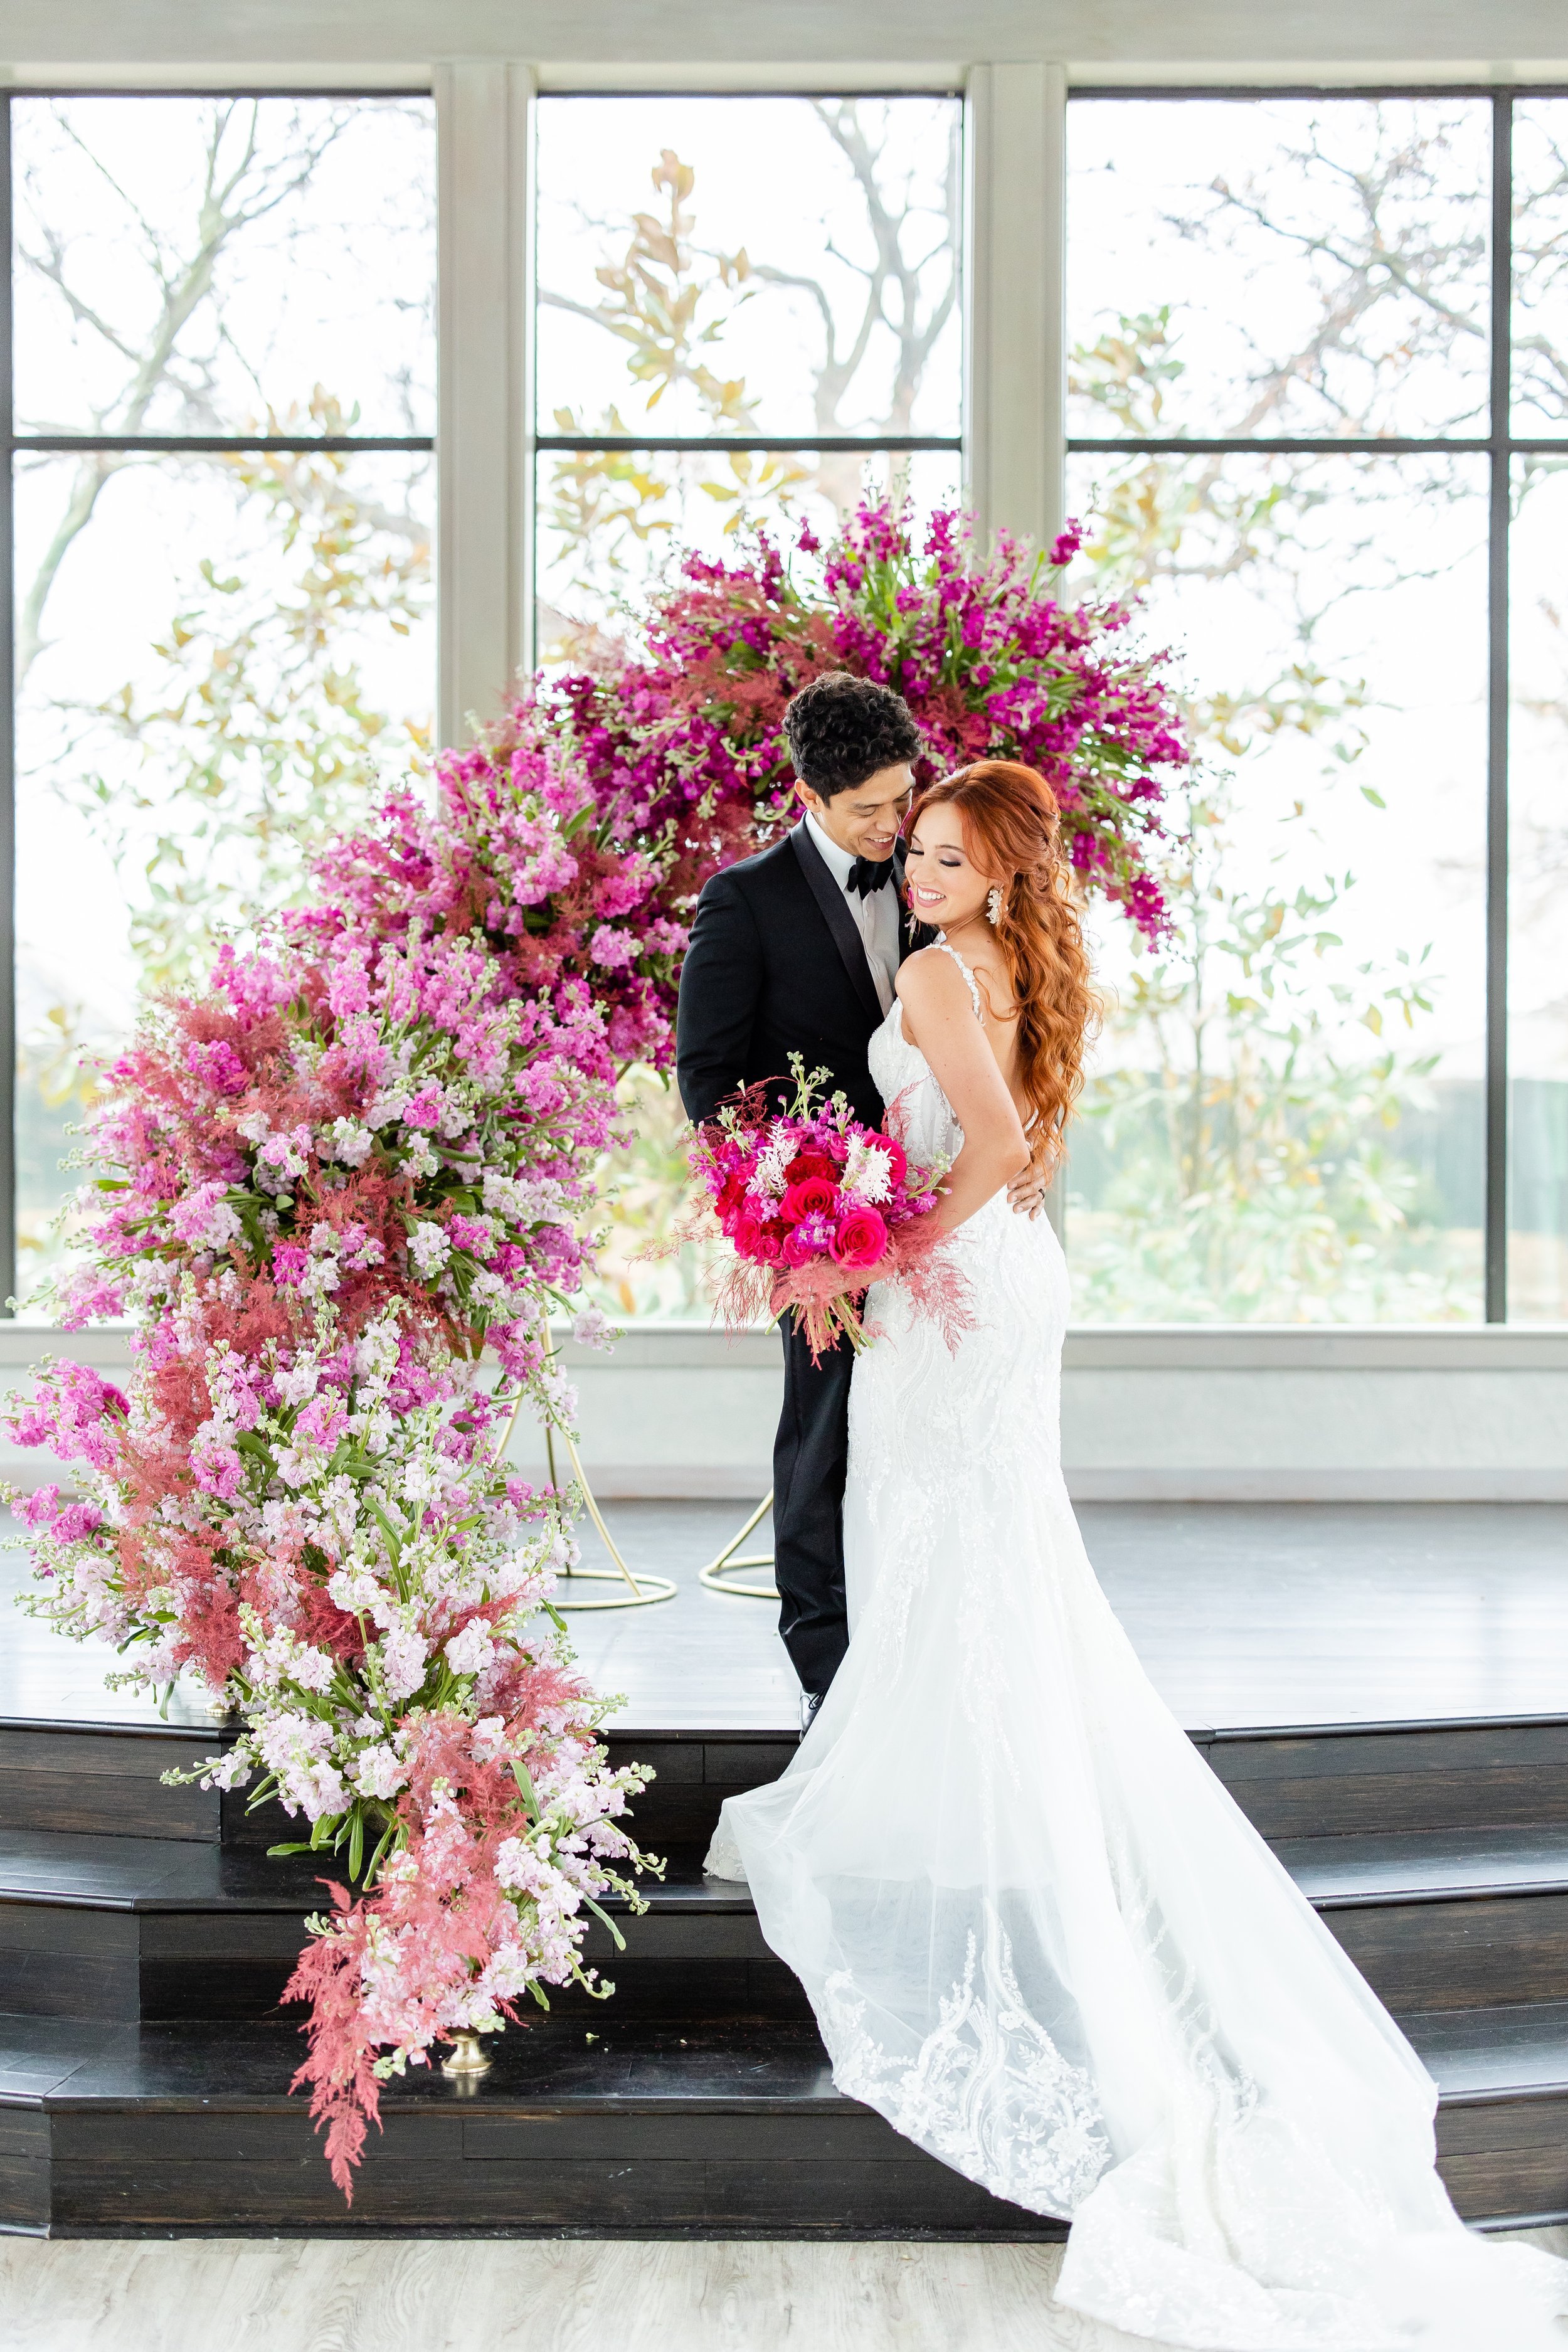 A bride and groom pose on an alter with a floral display behind them and huge windows in the background